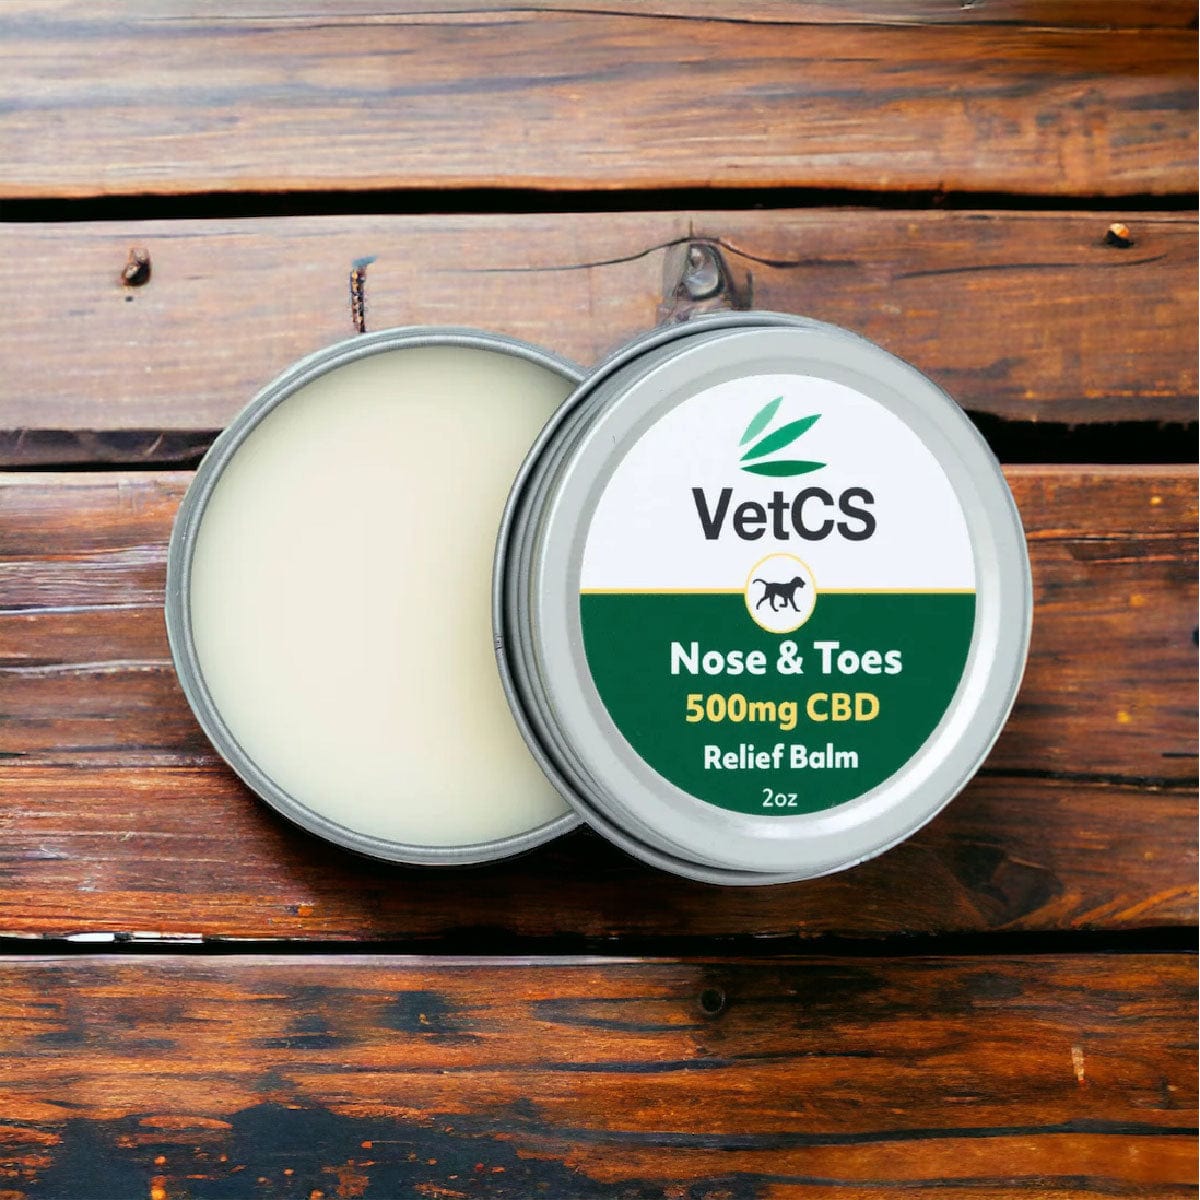 VetCS 2oz CBD Nose and Toes Palm for Dogs open on wood table